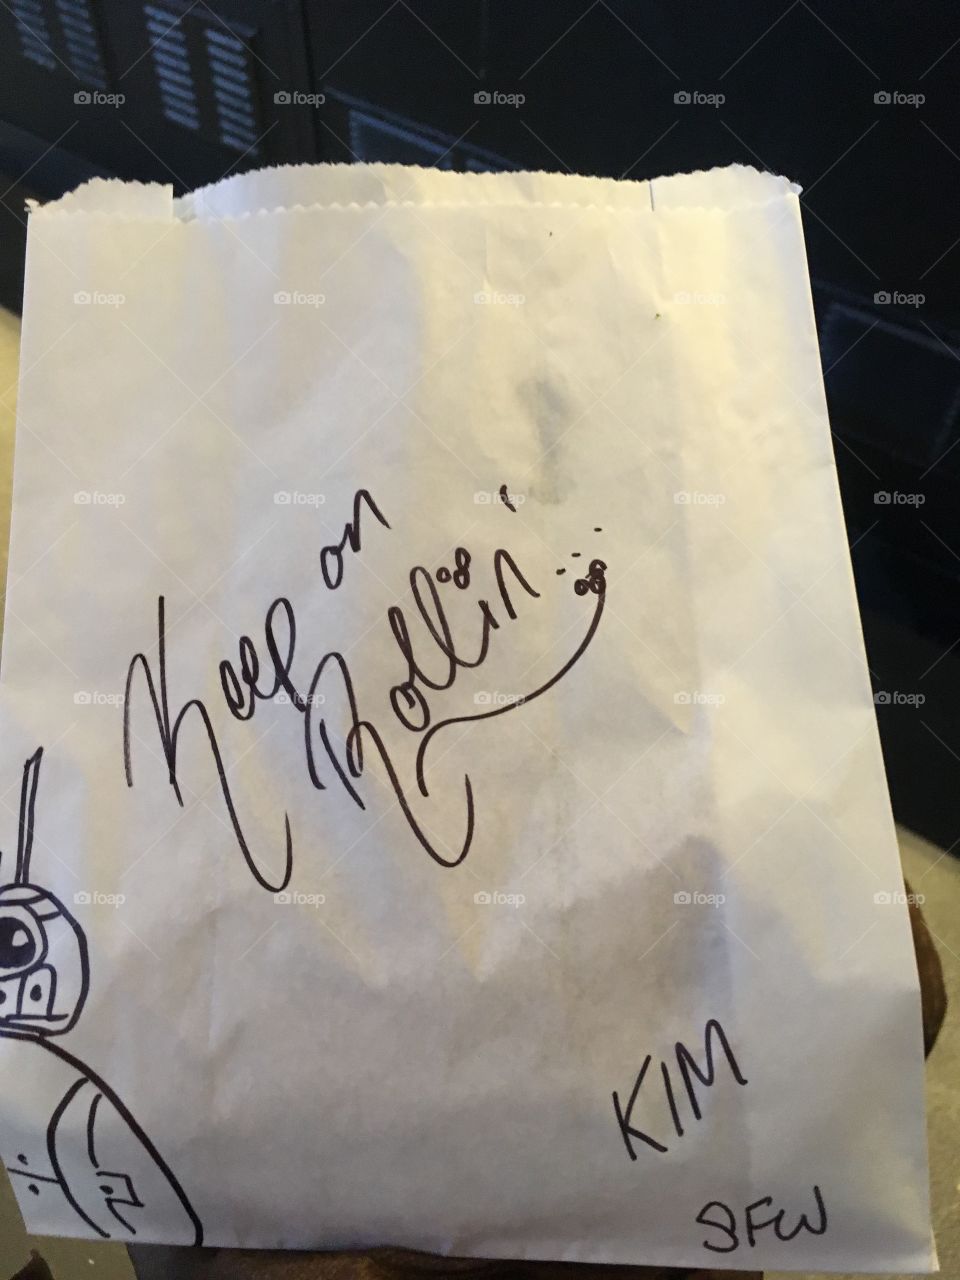 A handwritten note and sketch of r2d2 on a Starbucks order 